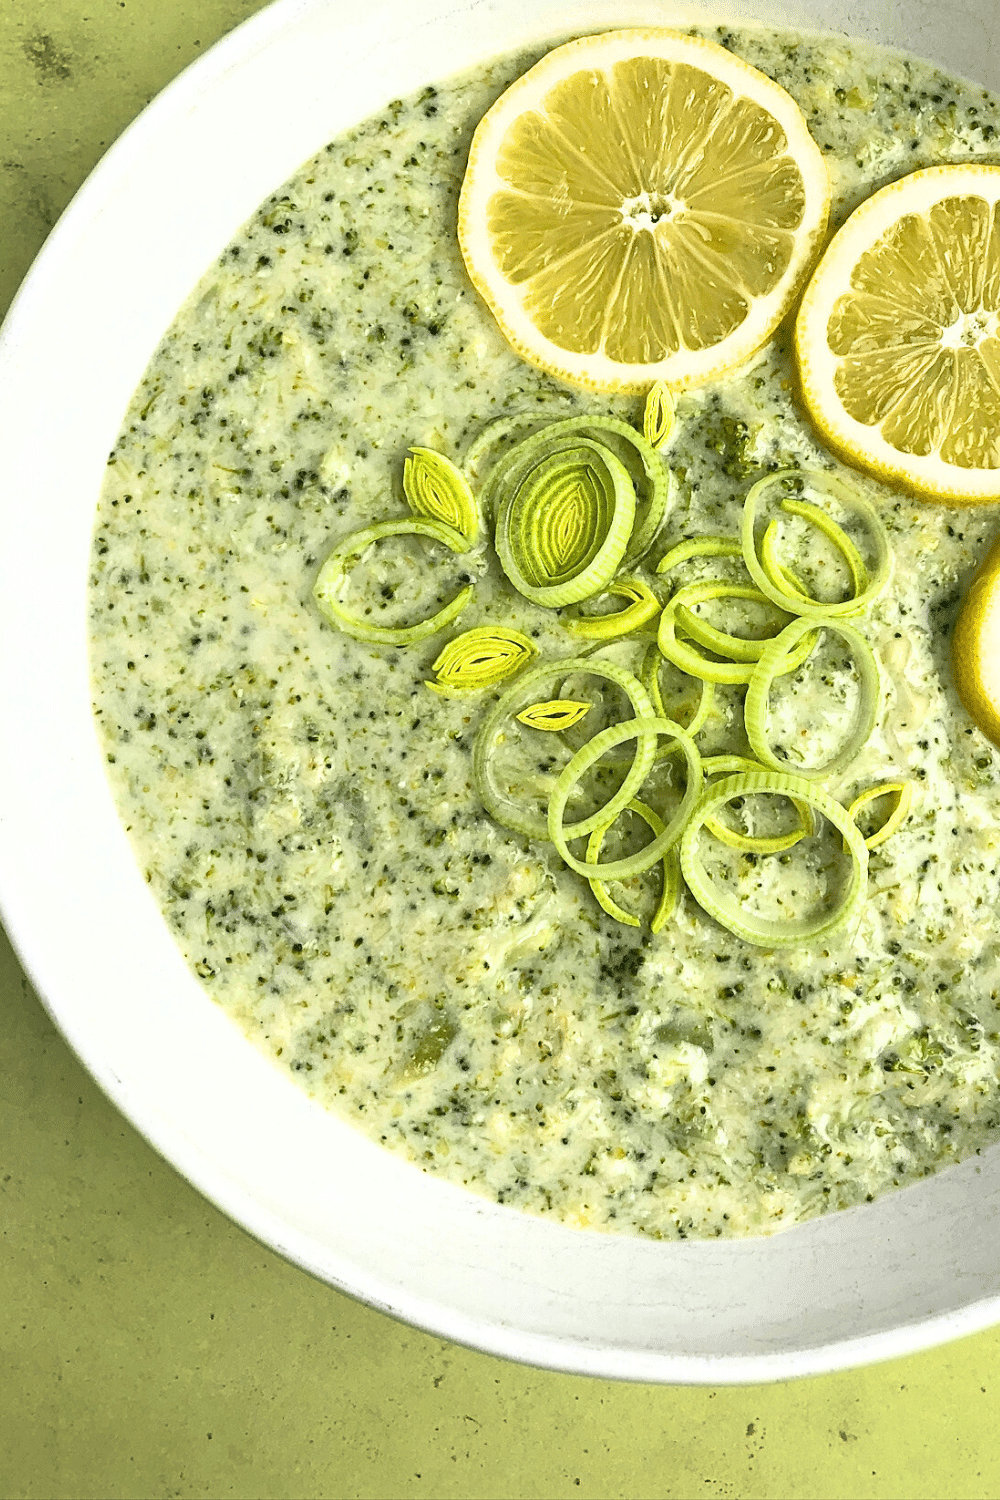 Top-down close up view of Creamy Lemon Leek and Broccoli Soup. The soup is in a white bowl and it is decorated with lemon slices and leek rings.